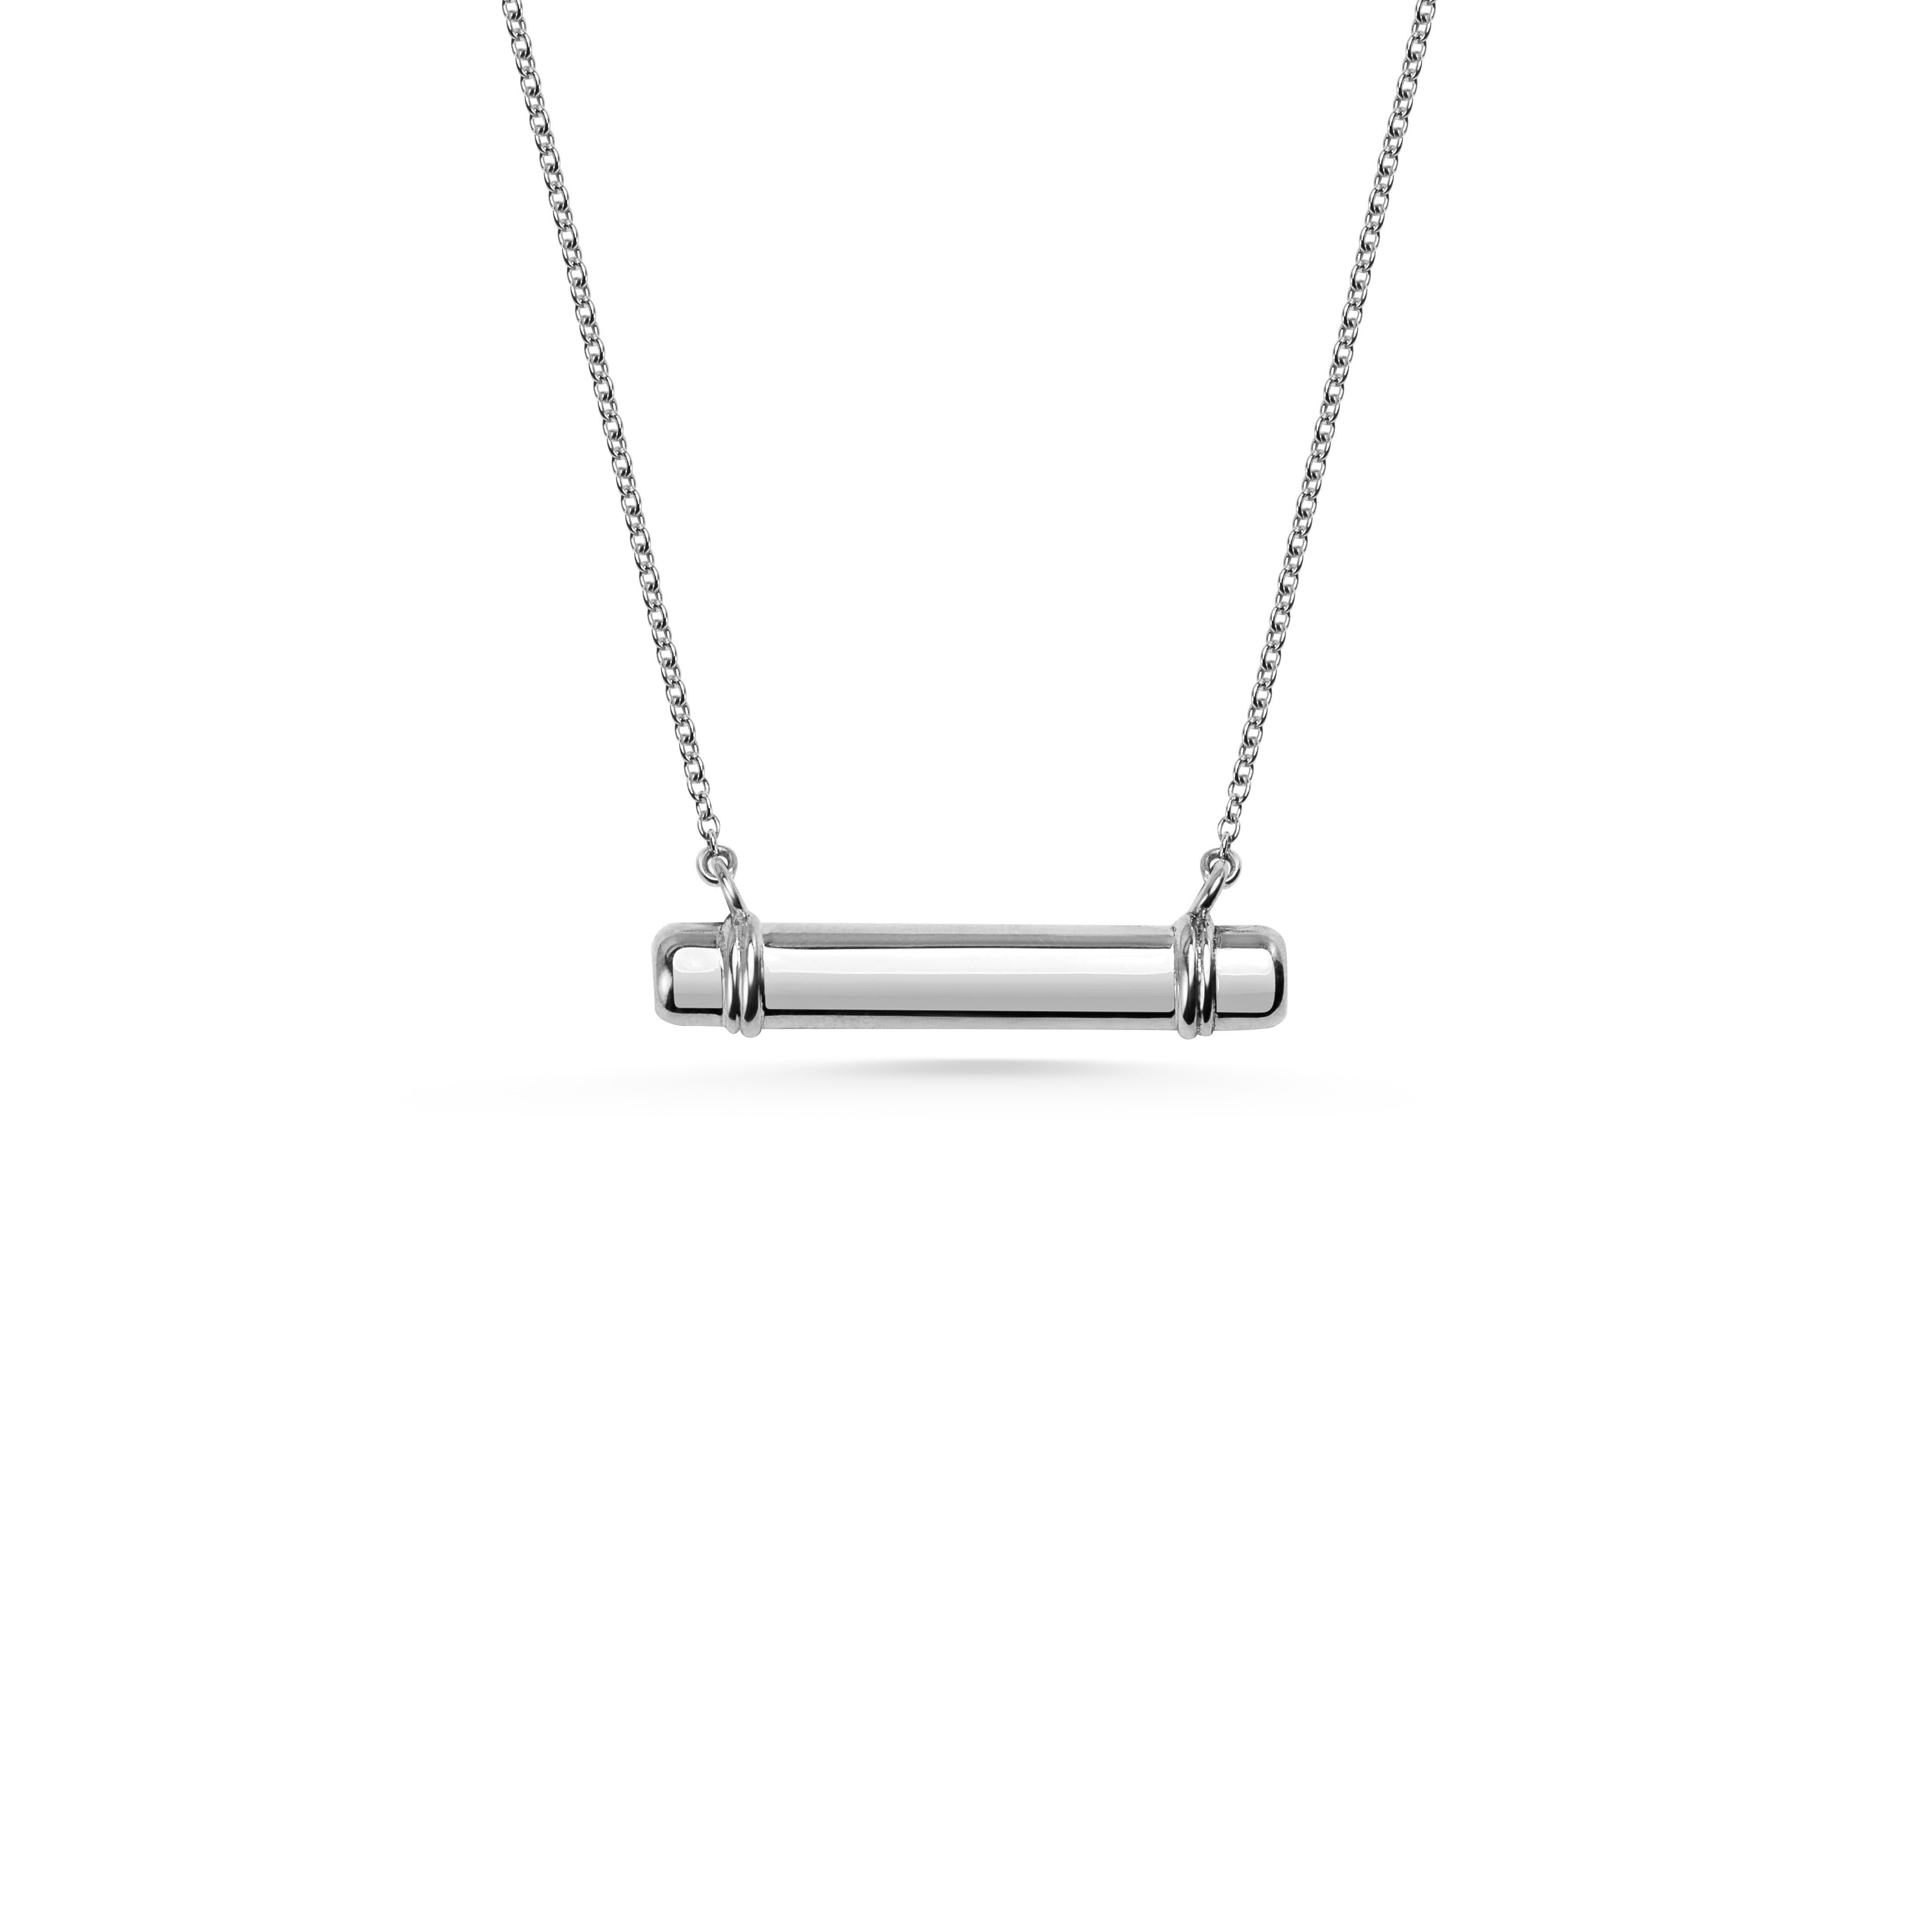 The Memento Necklace by East London jeweller Rachel Boston | Discover our collections of unique and timeless engagement rings, wedding rings, and modern fine jewellery.